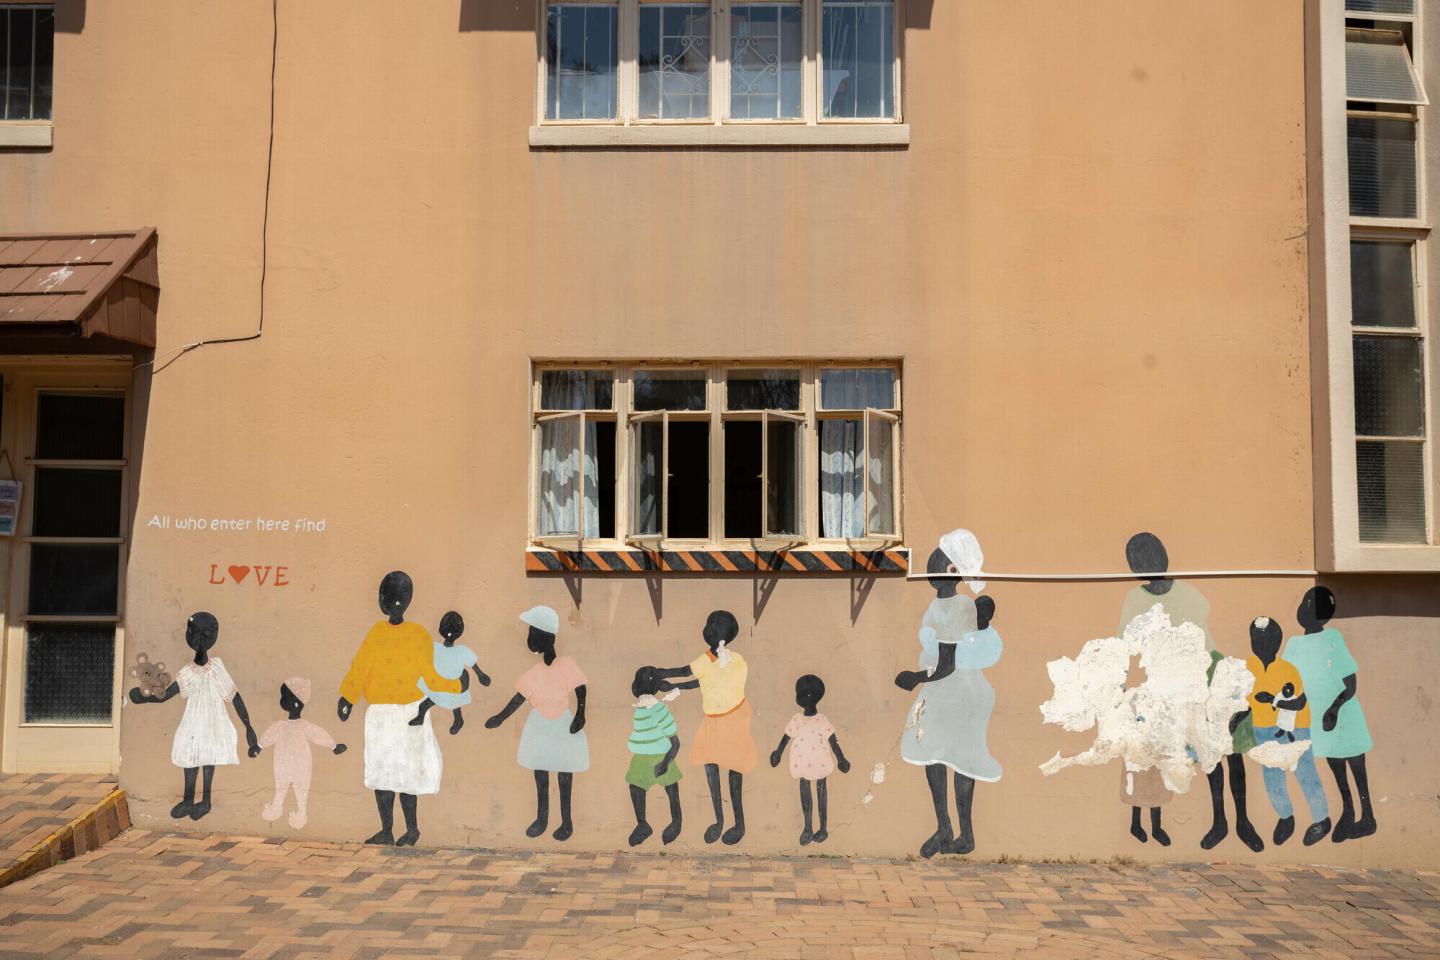 A building in Zimbabwe with a mural of people painted on the side of it